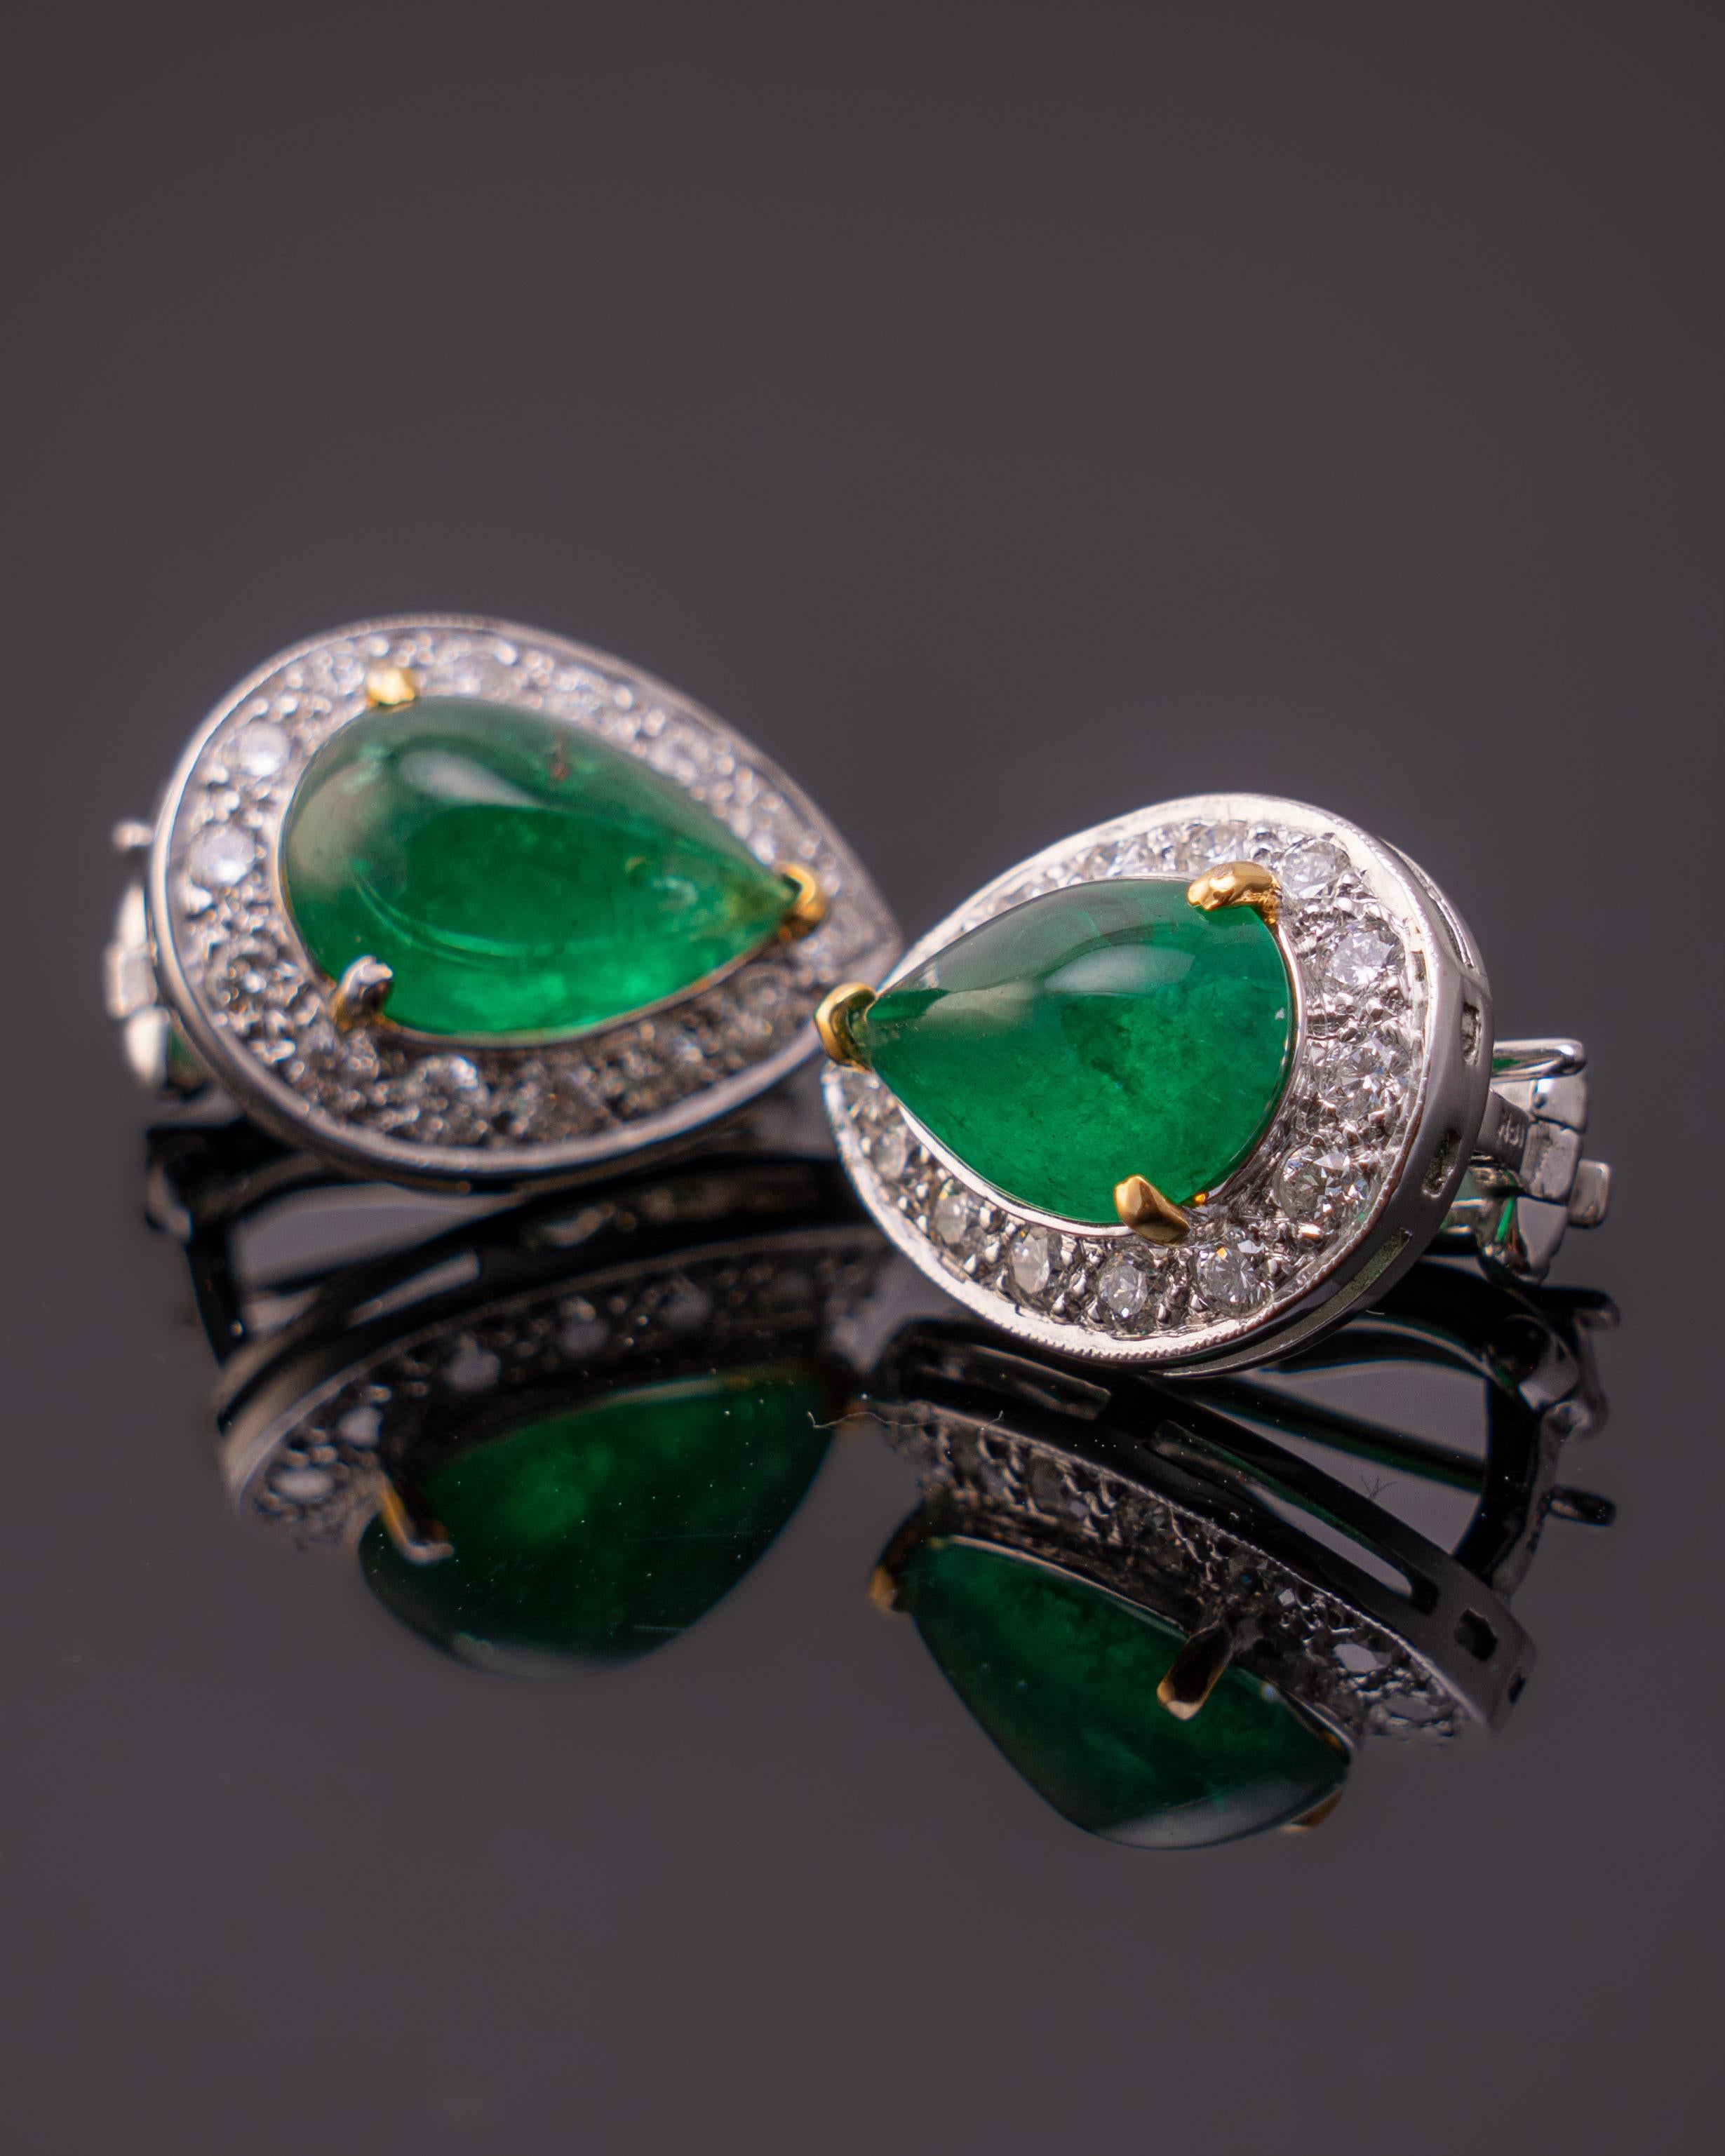 A pair of Zambian 12.98 carat cabochon emerald earrings set in 18K white gold with diamond details . The green hue makes the earrings have a Colombian tinch. A rare piece in indeed set with 0.37 of diamonds .

Free Shipping Worldwide and Returns